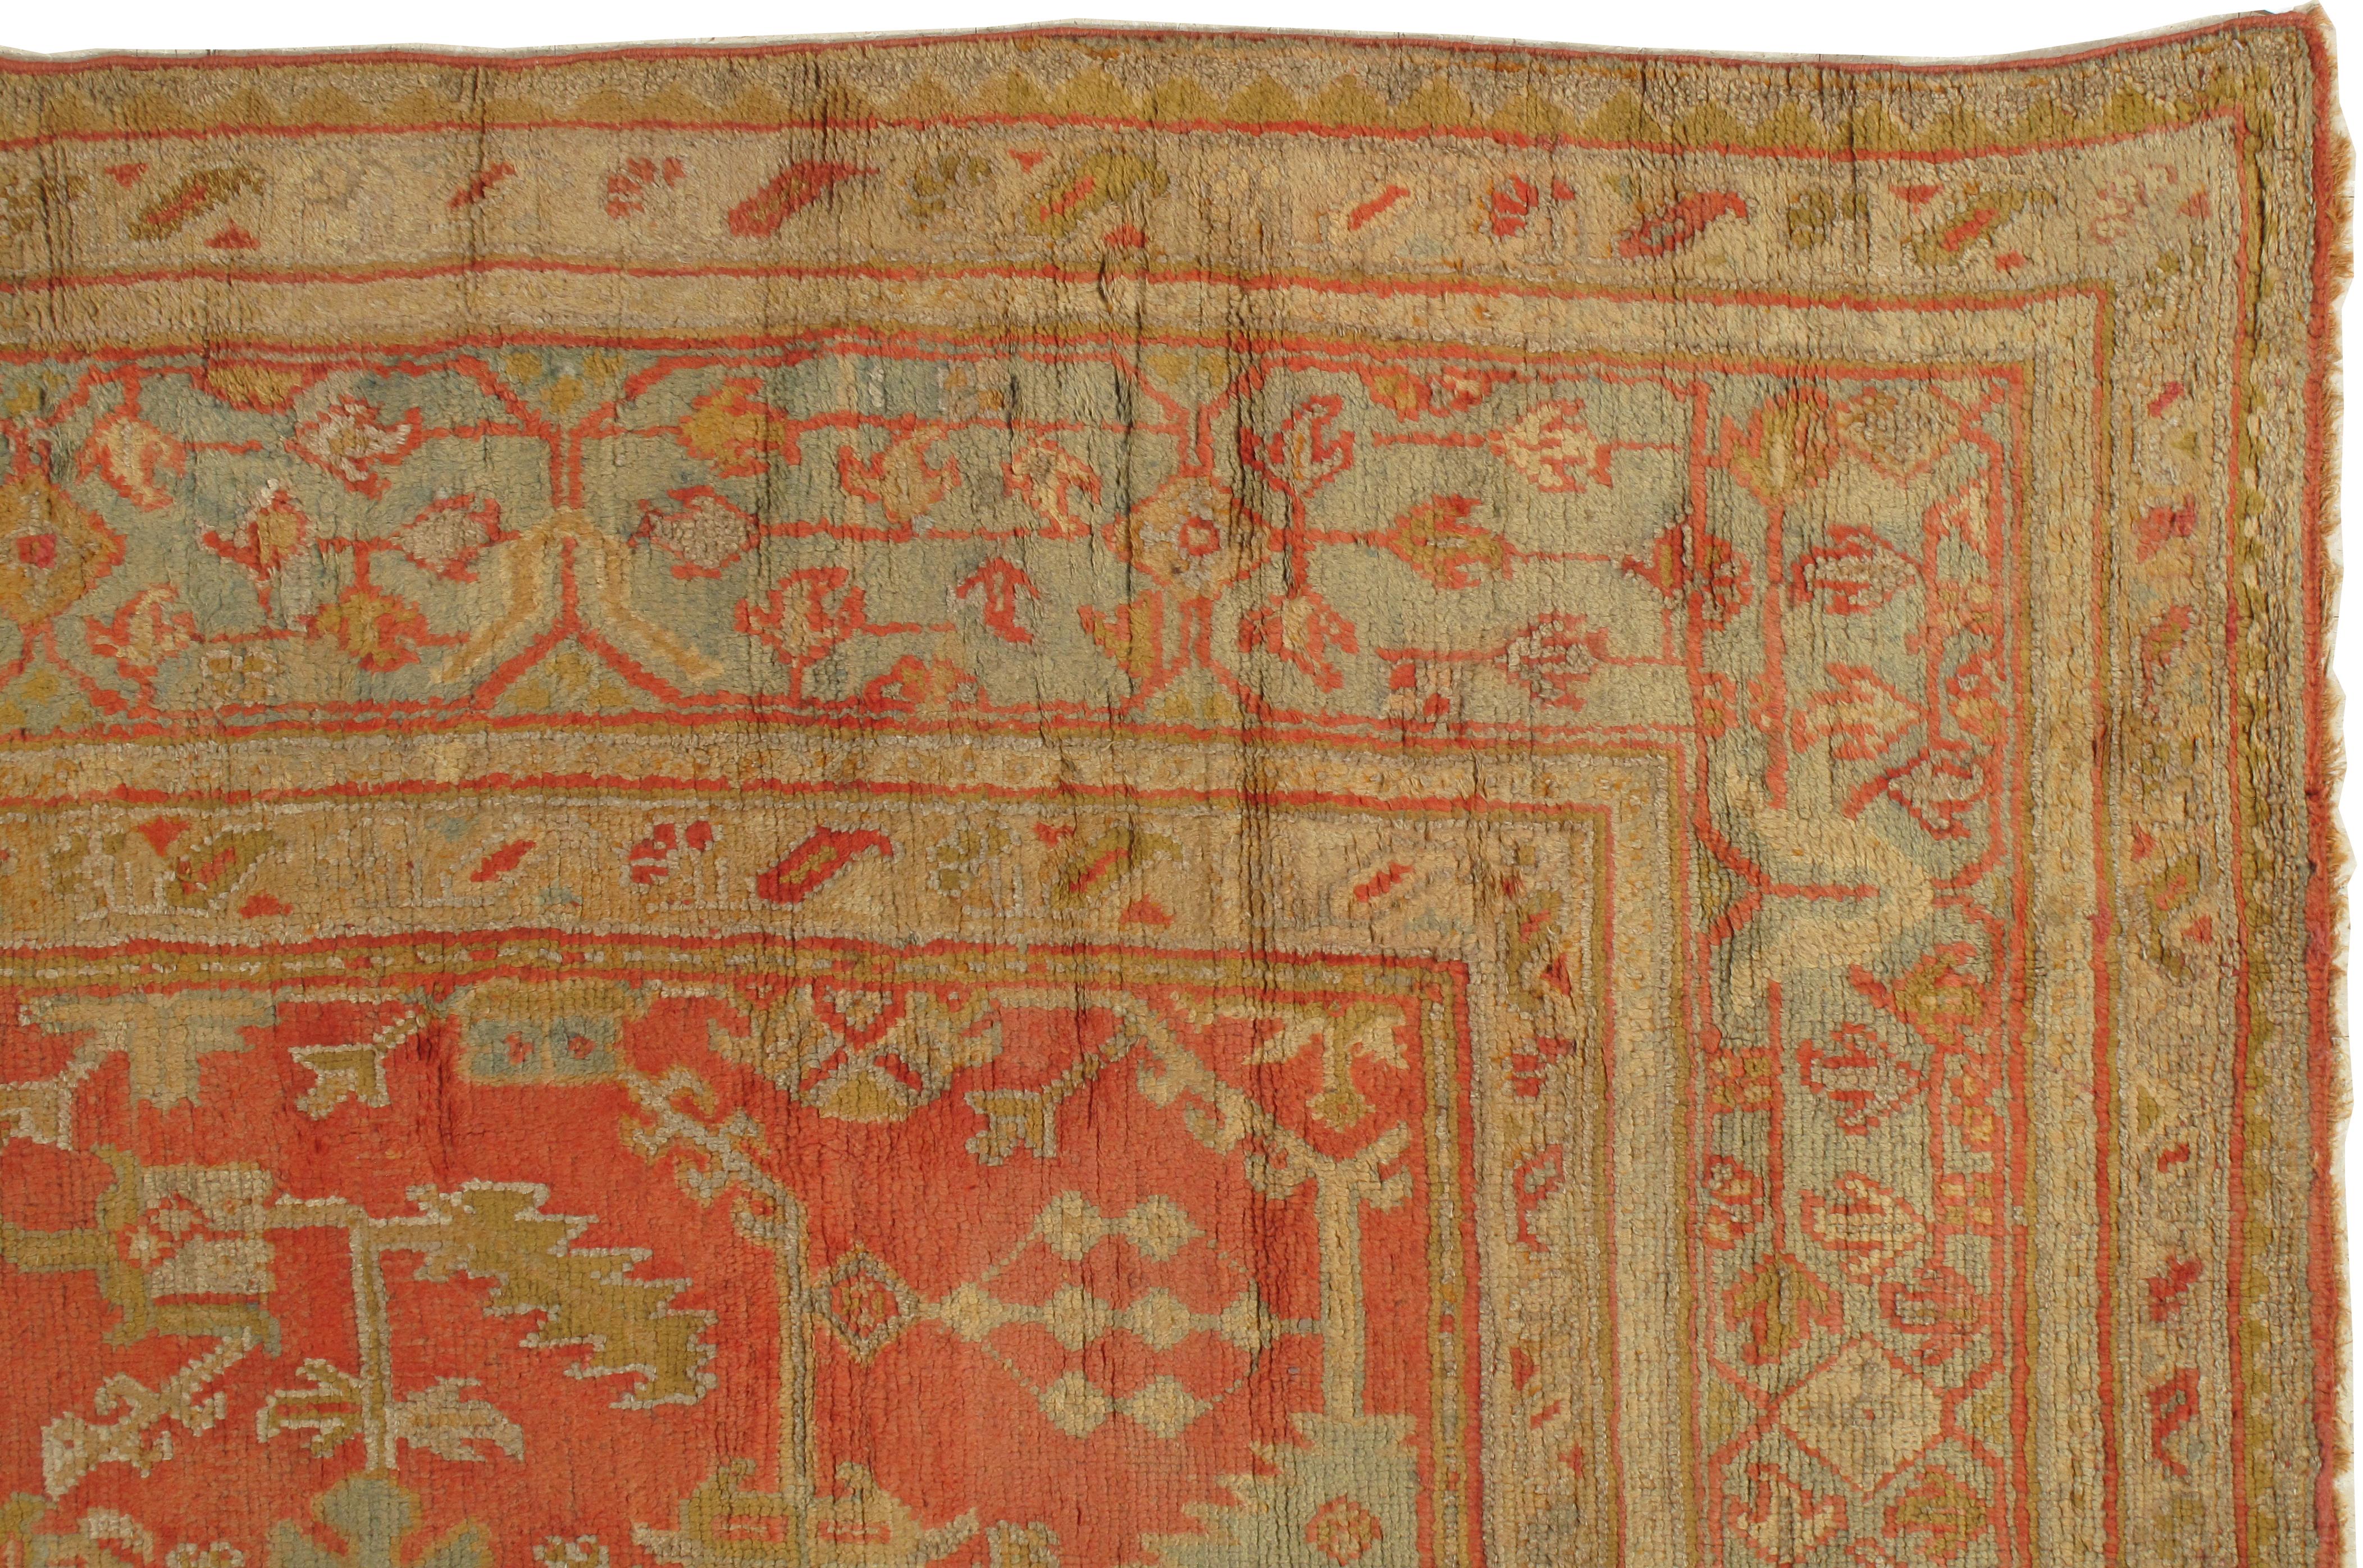 Antique Oushak Carpet, Oriental Rug, Handmade Rug Saffron, Light Blue and Coral In Good Condition For Sale In Port Washington, NY